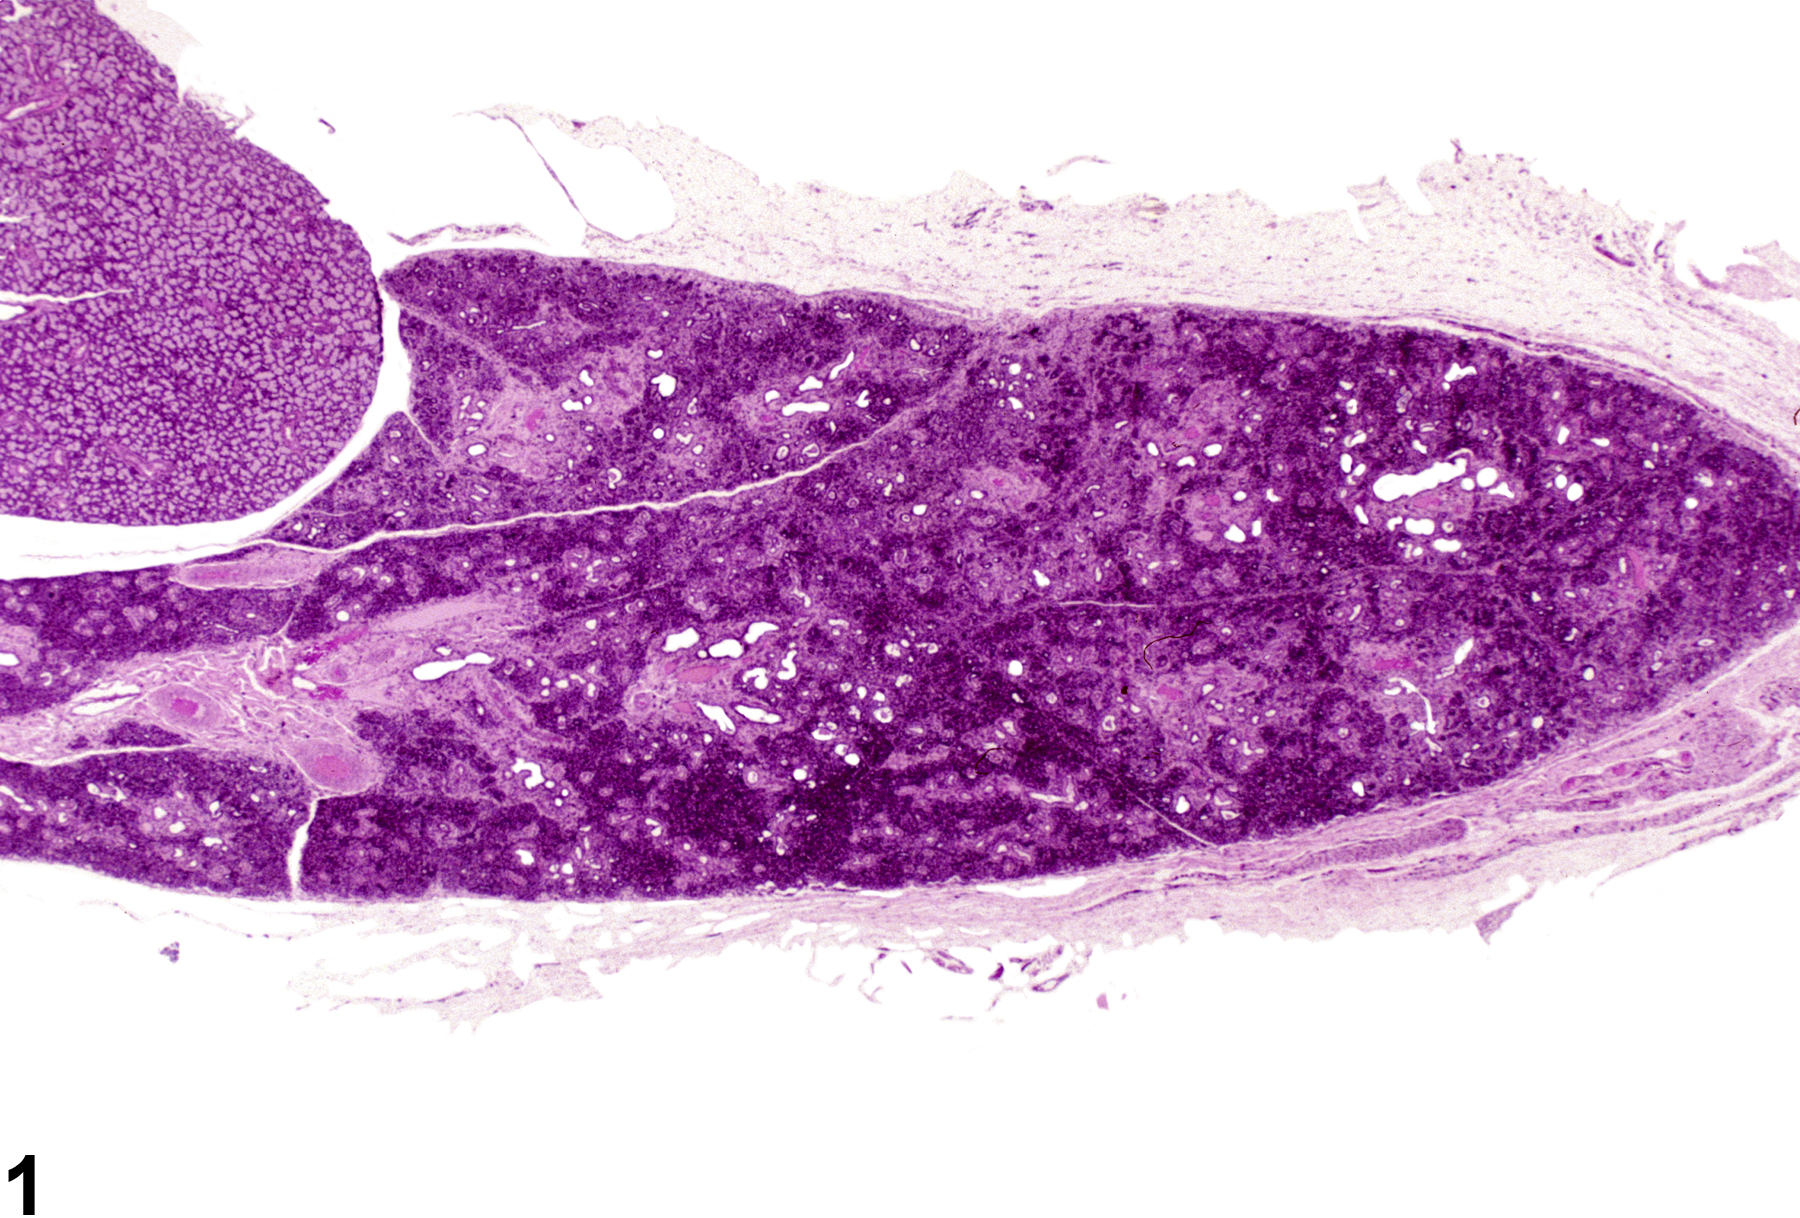 Image of atrophy in the salivary gland from a male F344/N rat in a chronic study